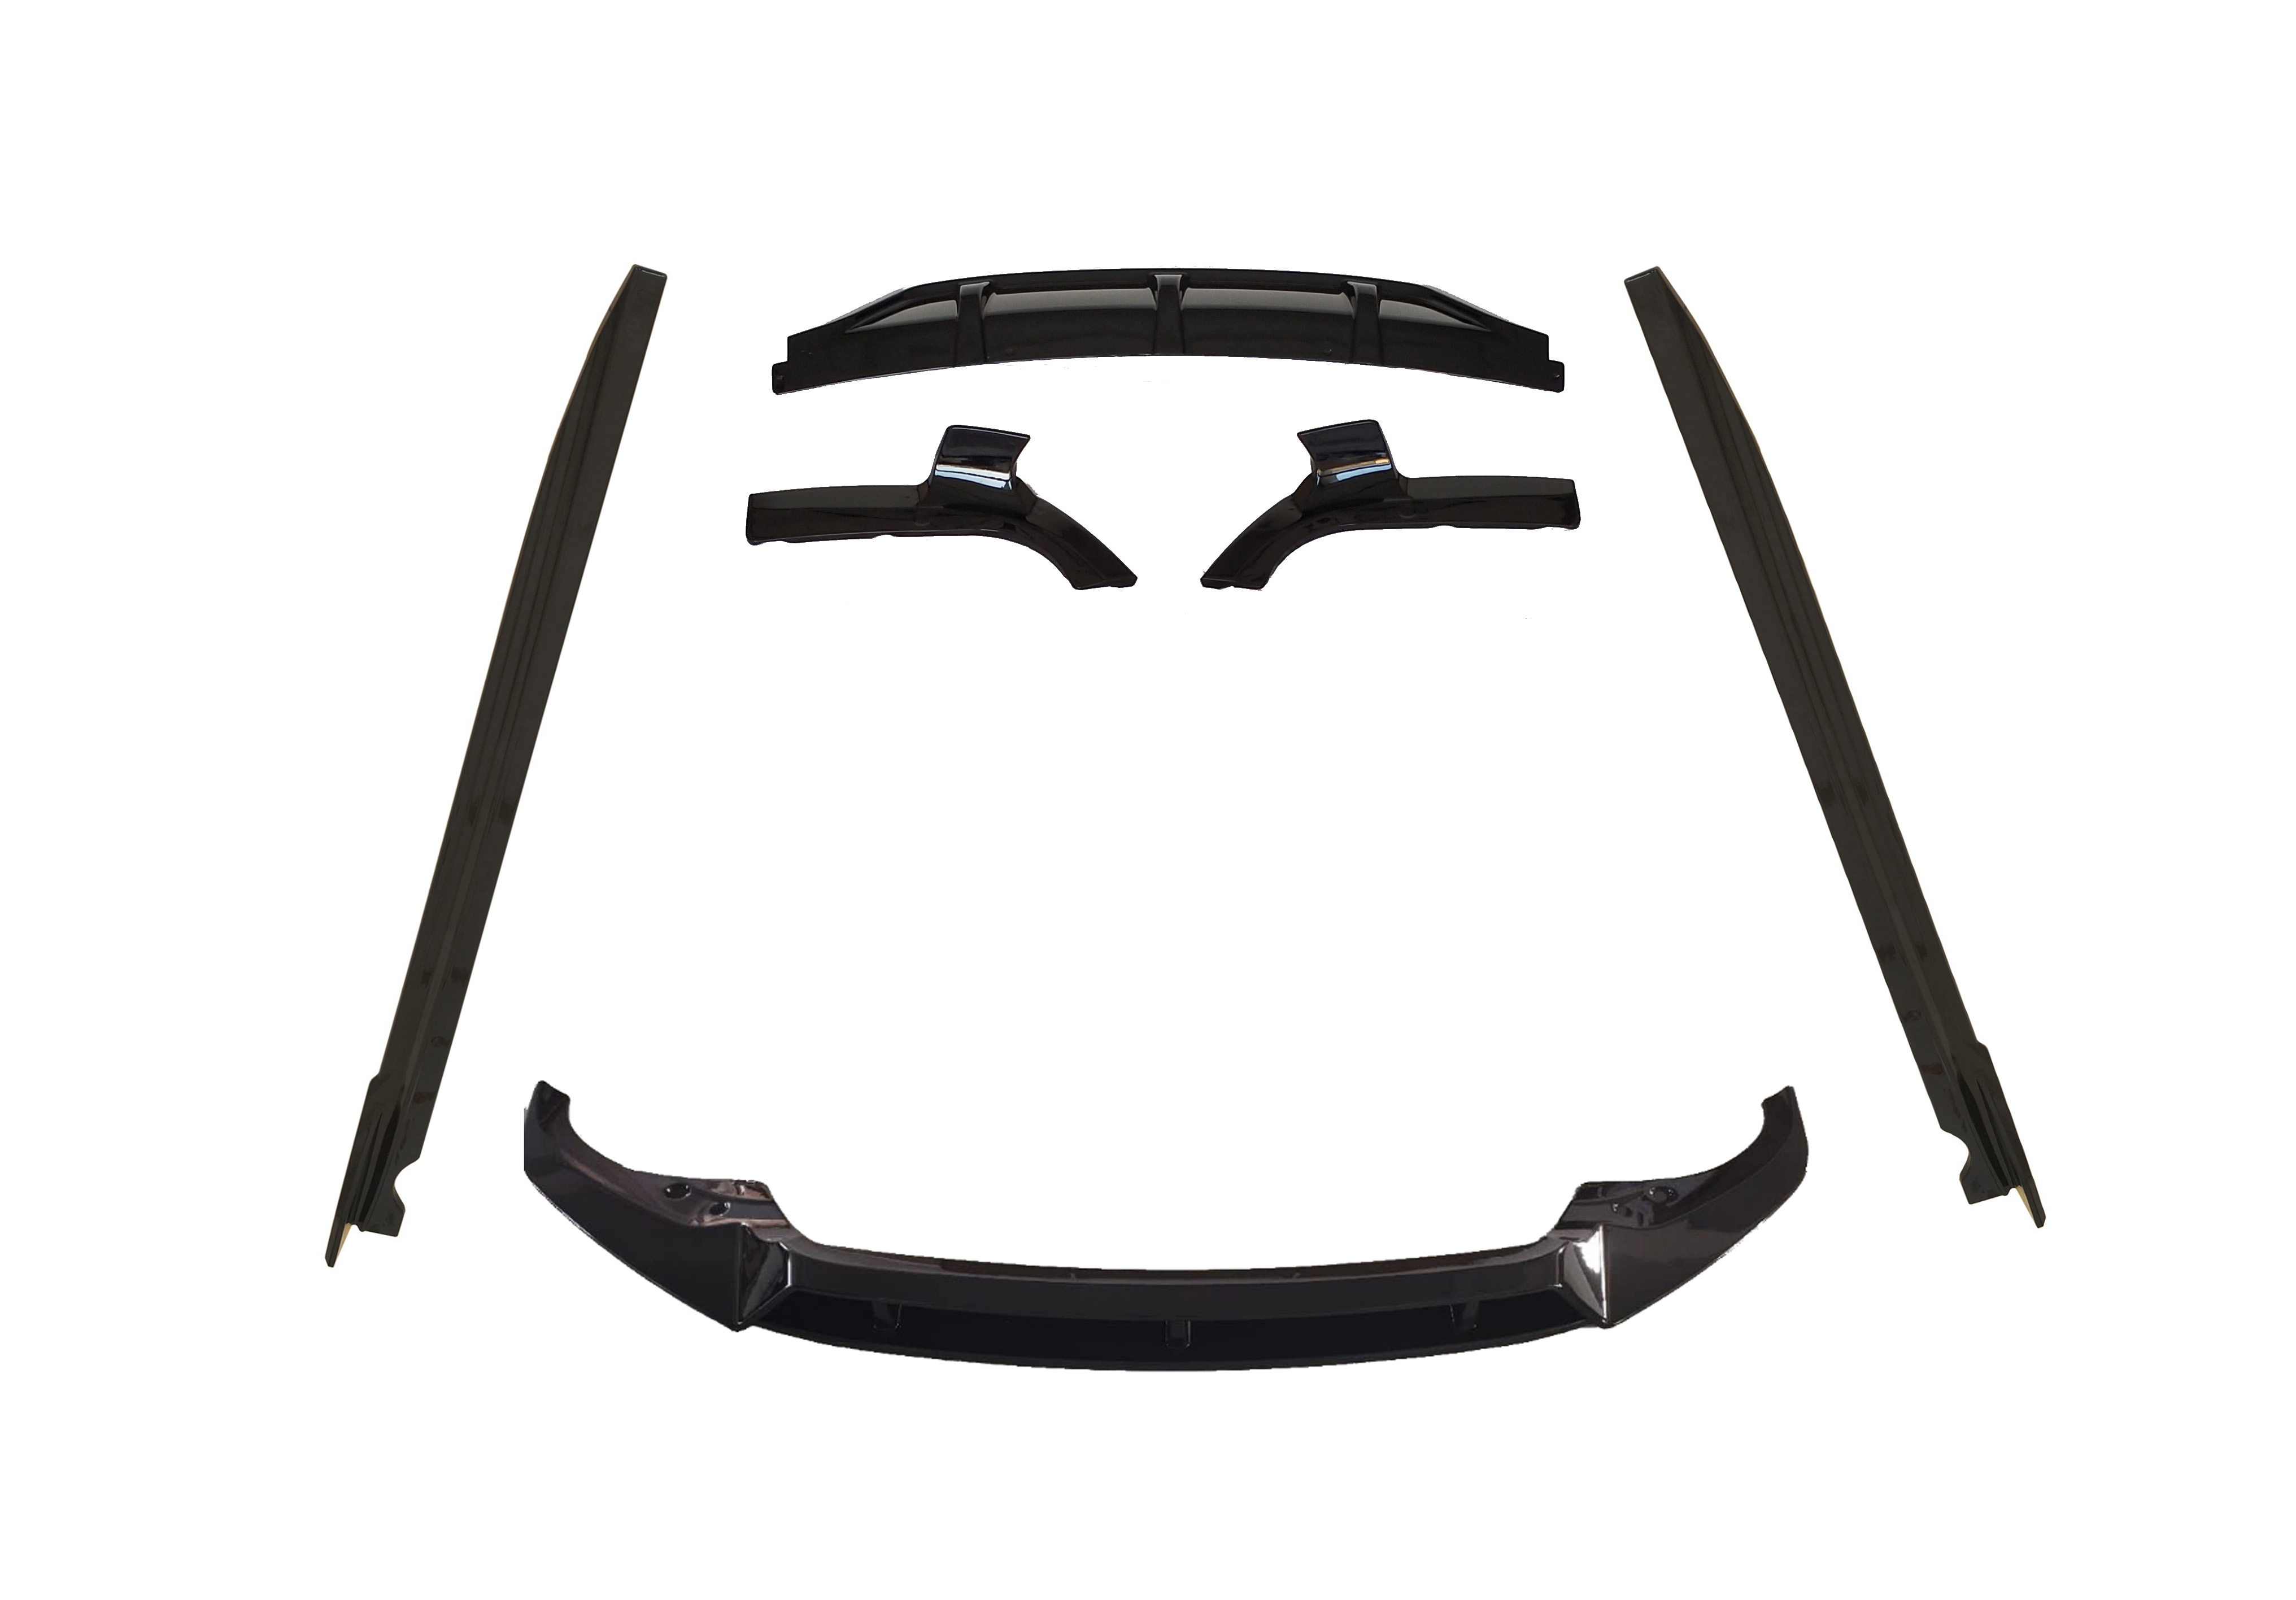 G06 SMALL KITS( FRONT+SIDE SKIRT+REAR DIFFUSER) GB/CARB -1